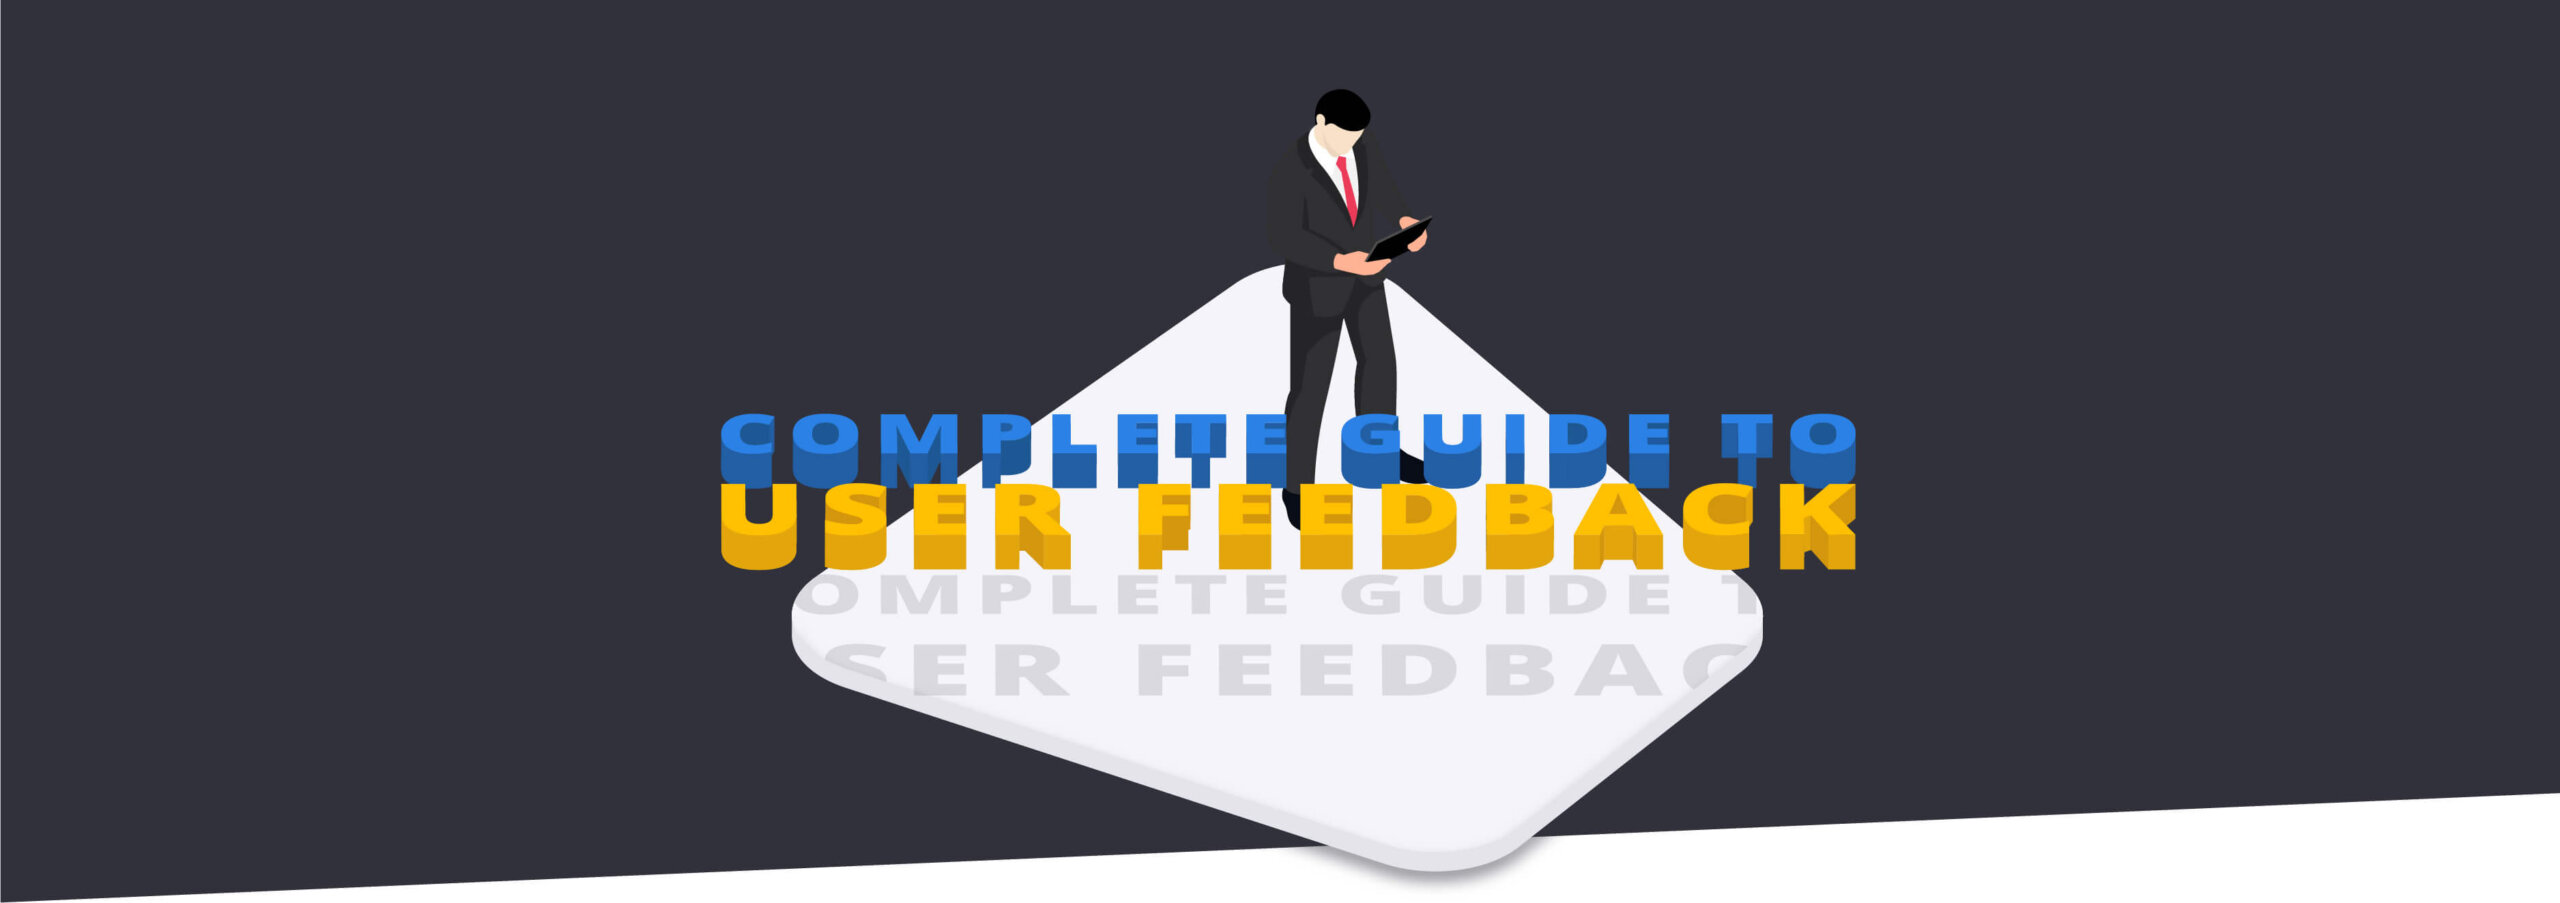 The Complete Guide to User Feedback